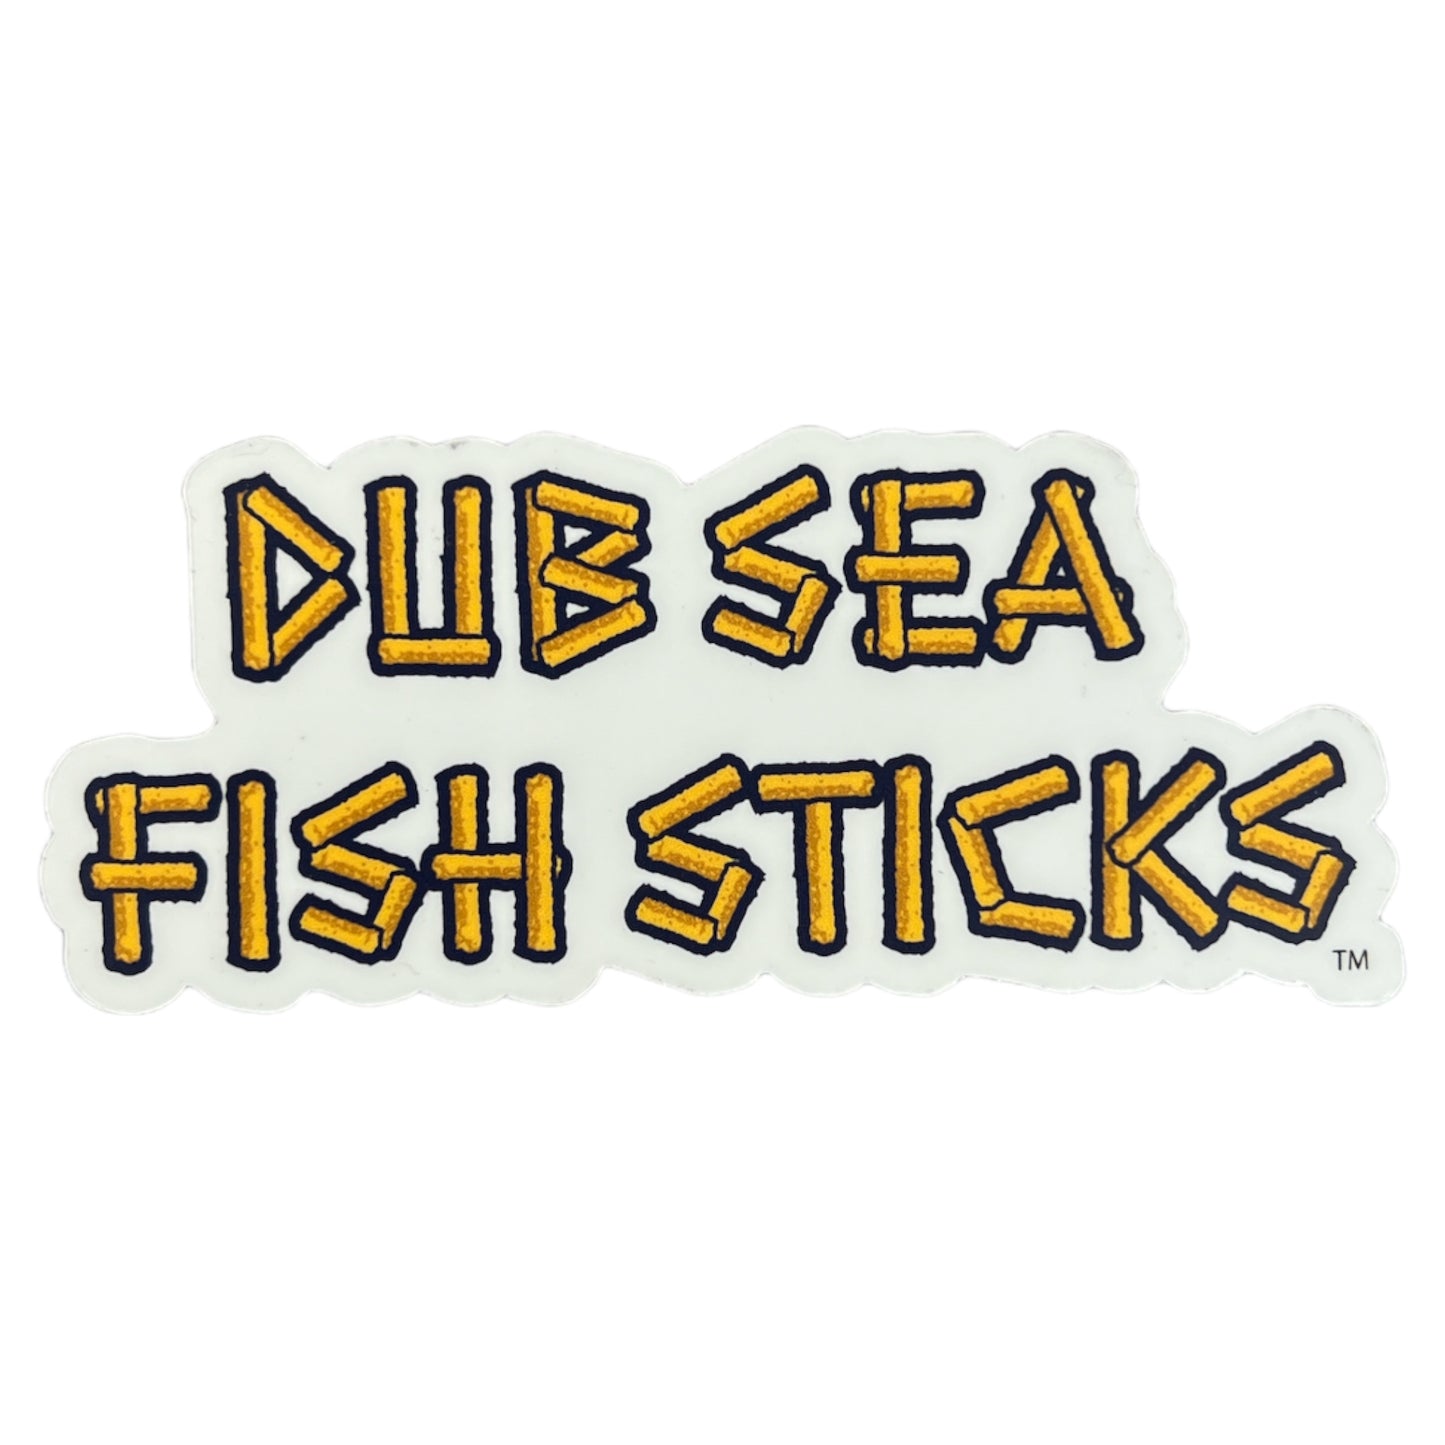 New_3_Sticker_Pack_Holographic_Crispy_The_Fryer_Dubsea_Fish_Sticks_Word_Stickers